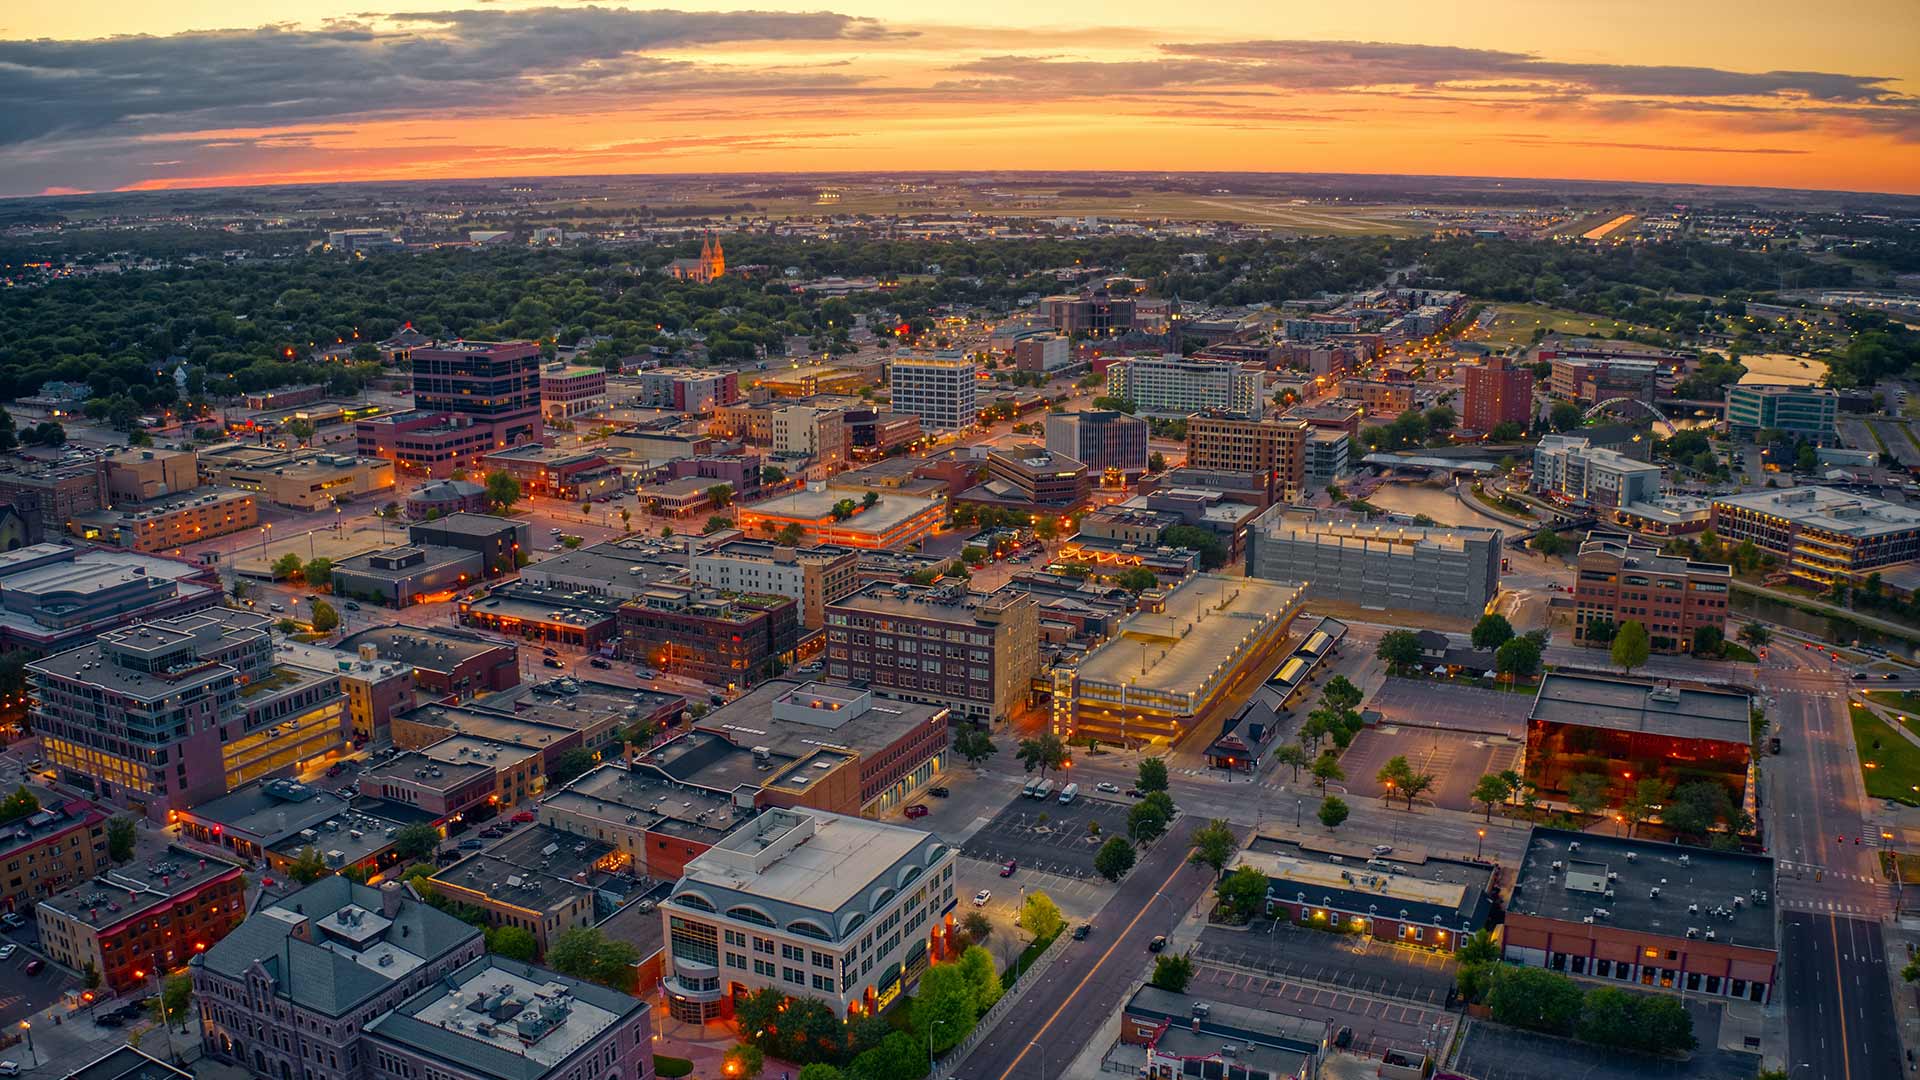 Aerial photo of Sioux Falls, SD at sunset with clouds.